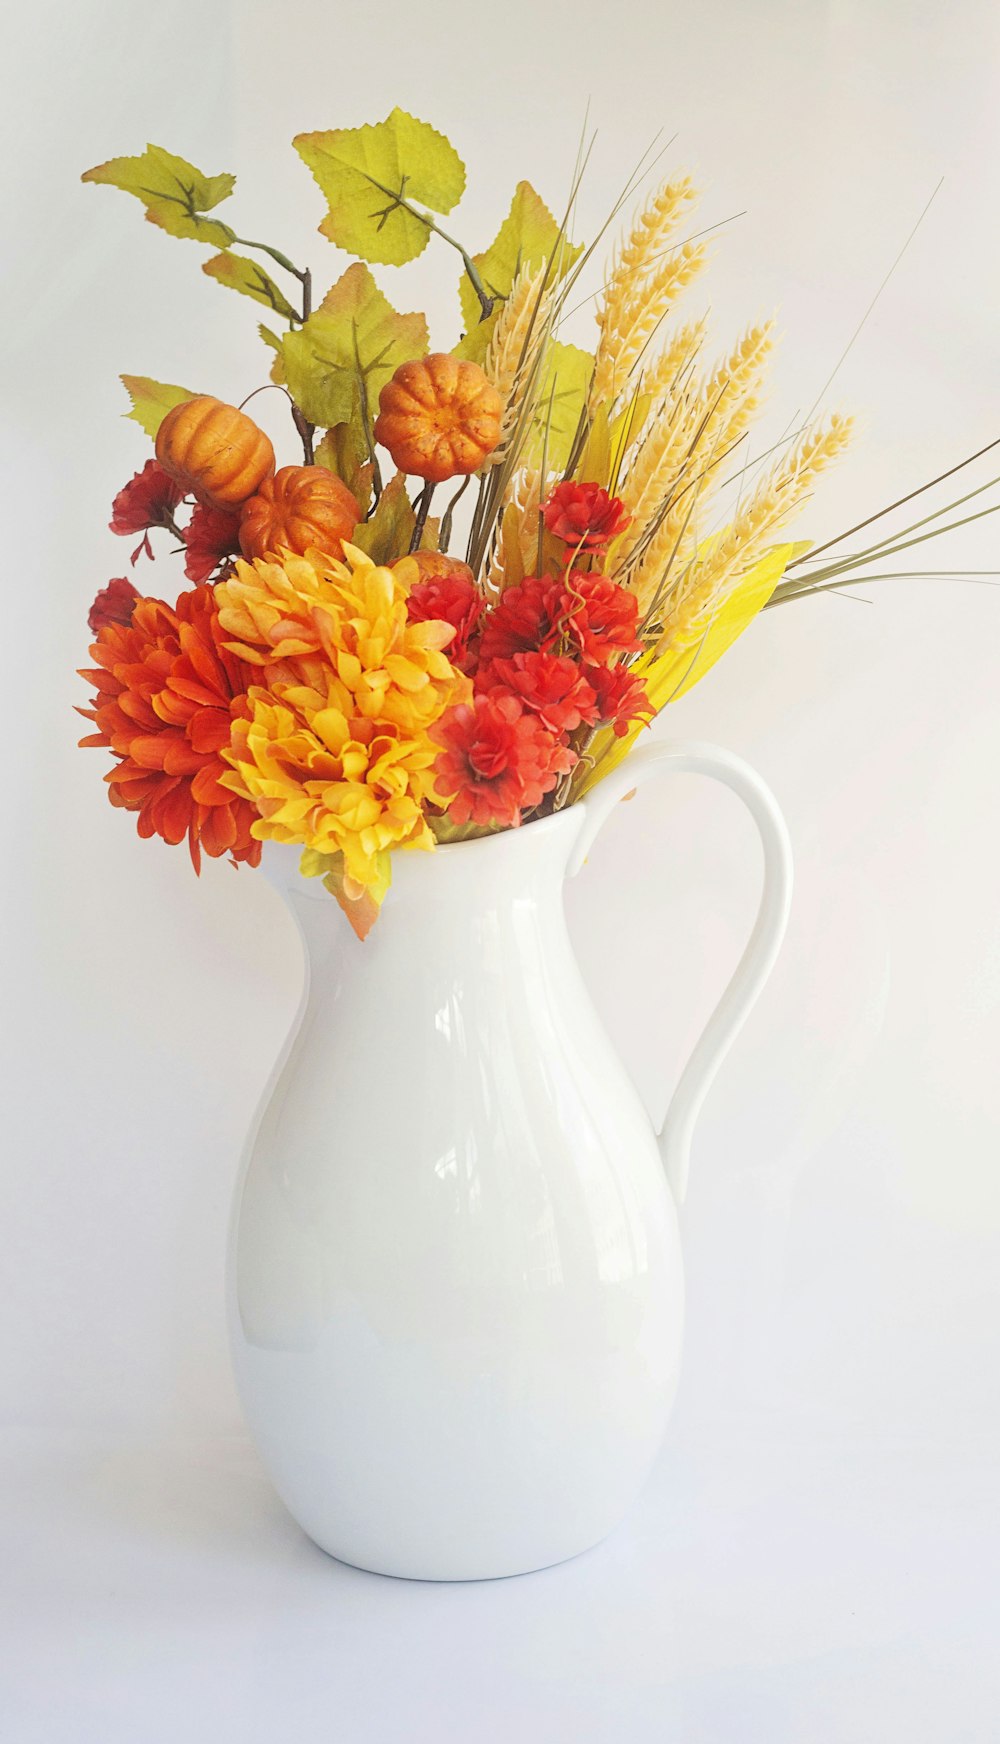 yellow and red flowers in white ceramic vase